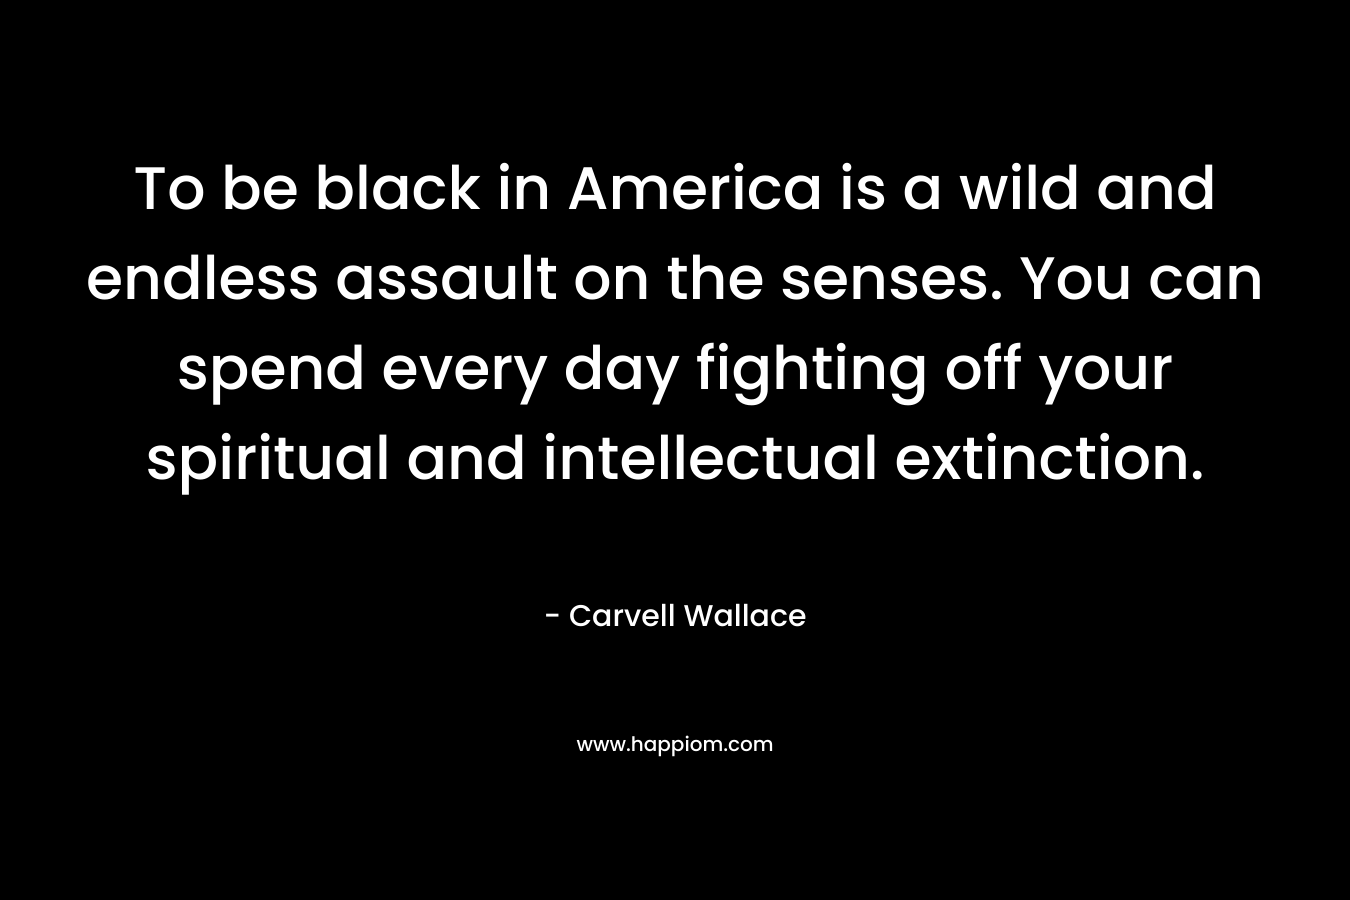 To be black in America is a wild and endless assault on the senses. You can spend every day fighting off your spiritual and intellectual extinction.